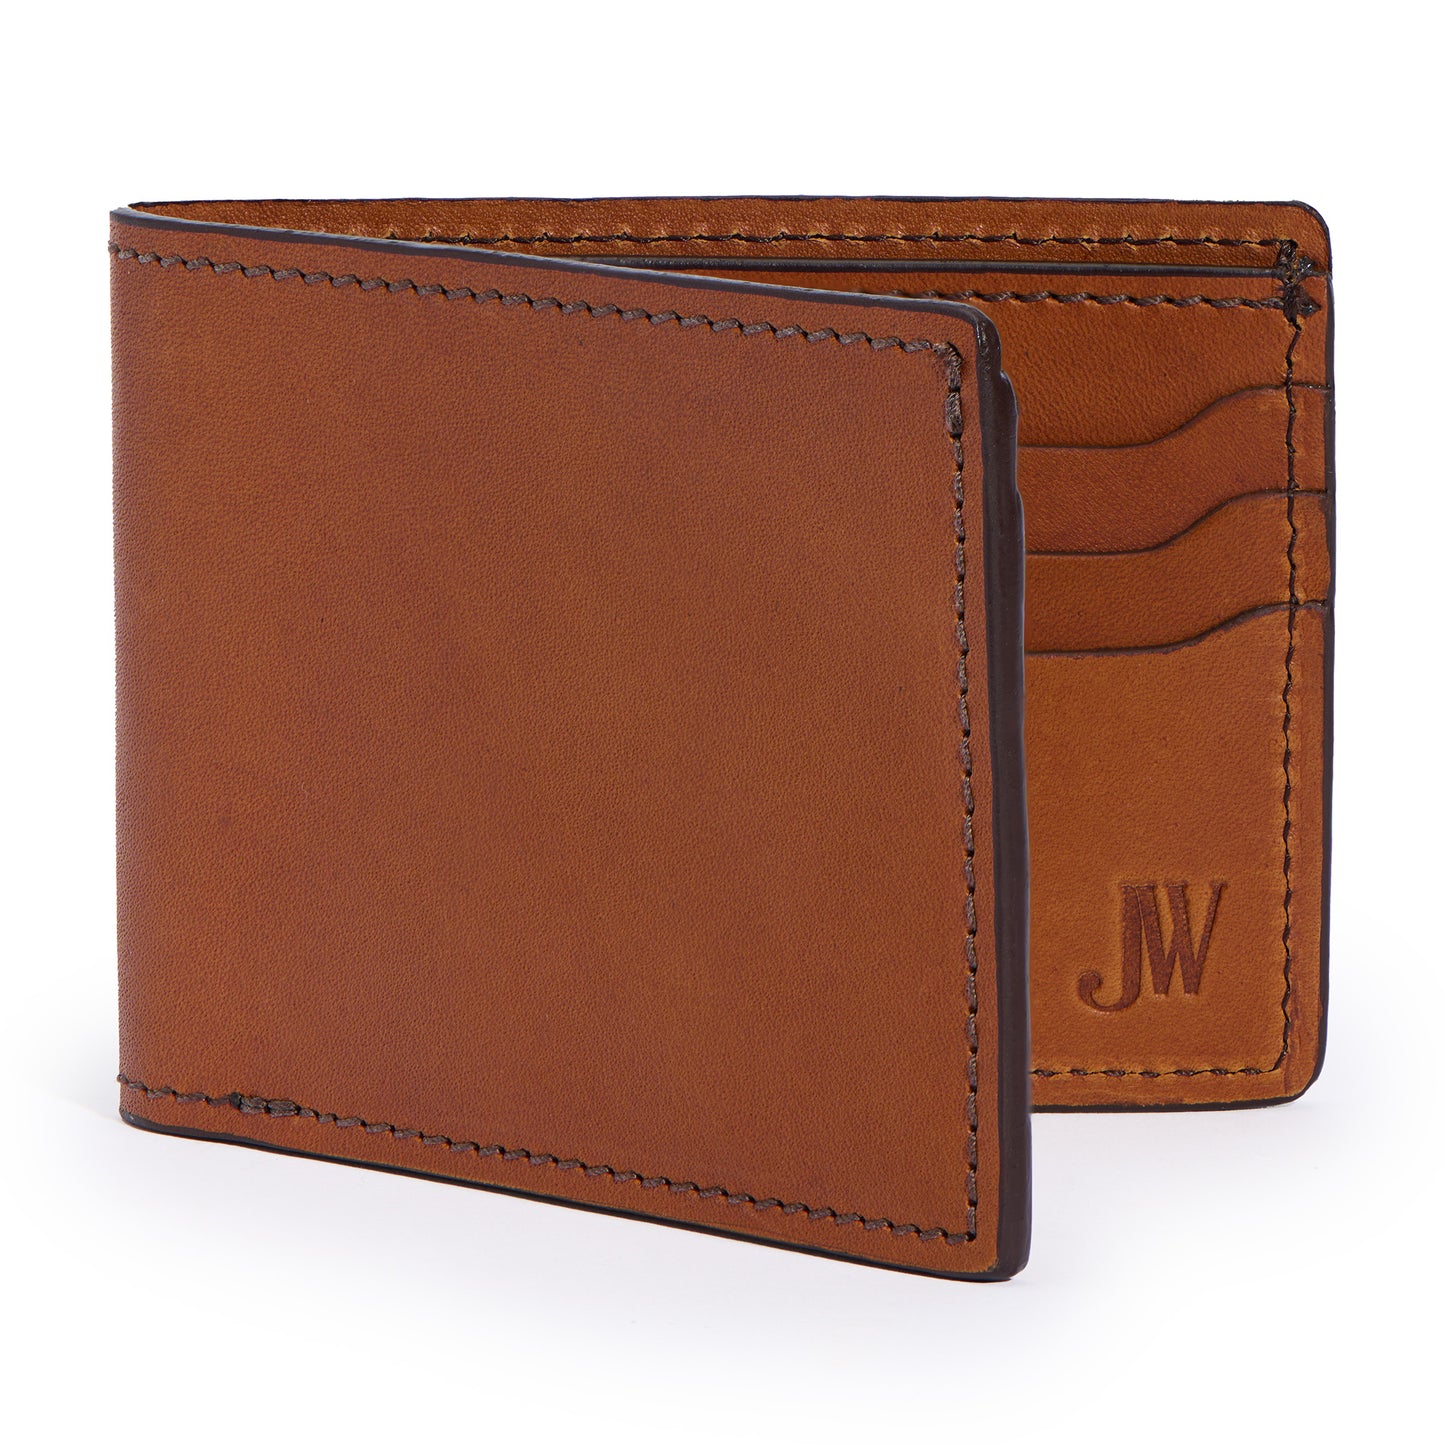 full grain leather bifold wallet in saddle tan color by Jackson Wayne 